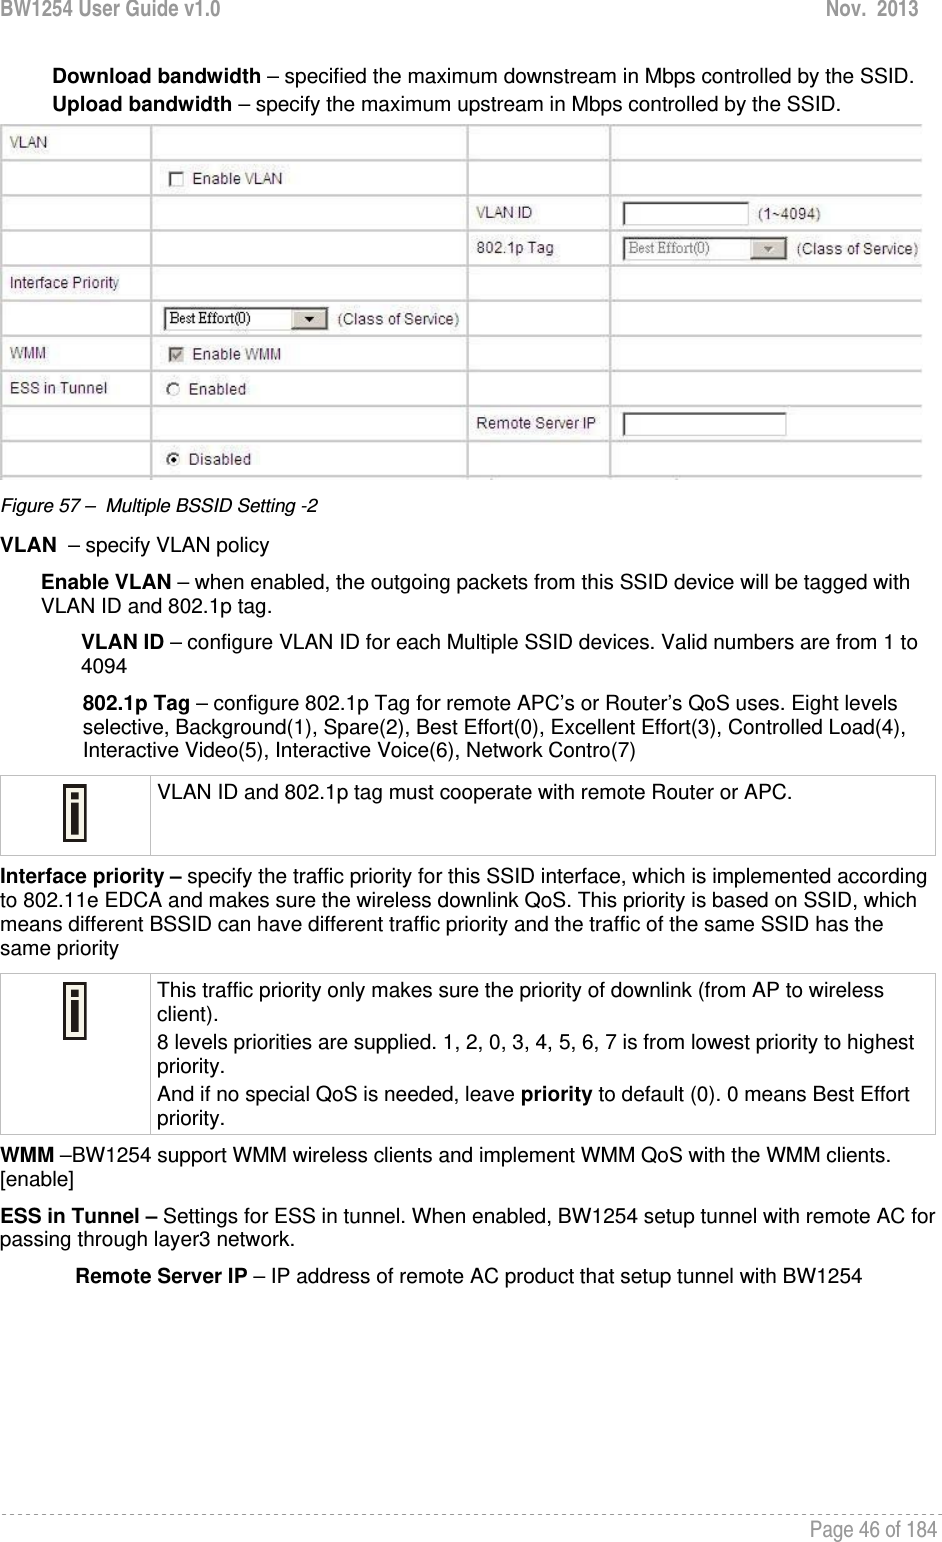 BW1254 User Guide v1.0  Nov.  2013     Page 46 of 184   Download bandwidth – specified the maximum downstream in Mbps controlled by the SSID. Upload bandwidth – specify the maximum upstream in Mbps controlled by the SSID.  Figure 57 –  Multiple BSSID Setting -2 VLAN  – specify VLAN policy  Enable VLAN – when enabled, the outgoing packets from this SSID device will be tagged with VLAN ID and 802.1p tag.  VLAN ID – configure VLAN ID for each Multiple SSID devices. Valid numbers are from 1 to 4094 802.1p Tag – configure 802.1p Tag for remote APC’s or Router’s QoS uses. Eight levels selective, Background(1), Spare(2), Best Effort(0), Excellent Effort(3), Controlled Load(4), Interactive Video(5), Interactive Voice(6), Network Contro(7)  VLAN ID and 802.1p tag must cooperate with remote Router or APC.  Interface priority – specify the traffic priority for this SSID interface, which is implemented according to 802.11e EDCA and makes sure the wireless downlink QoS. This priority is based on SSID, which means different BSSID can have different traffic priority and the traffic of the same SSID has the same priority  This traffic priority only makes sure the priority of downlink (from AP to wireless client). 8 levels priorities are supplied. 1, 2, 0, 3, 4, 5, 6, 7 is from lowest priority to highest priority.  And if no special QoS is needed, leave priority to default (0). 0 means Best Effort priority.  WMM –BW1254 support WMM wireless clients and implement WMM QoS with the WMM clients. [enable] ESS in Tunnel – Settings for ESS in tunnel. When enabled, BW1254 setup tunnel with remote AC for passing through layer3 network.  Remote Server IP – IP address of remote AC product that setup tunnel with BW1254 